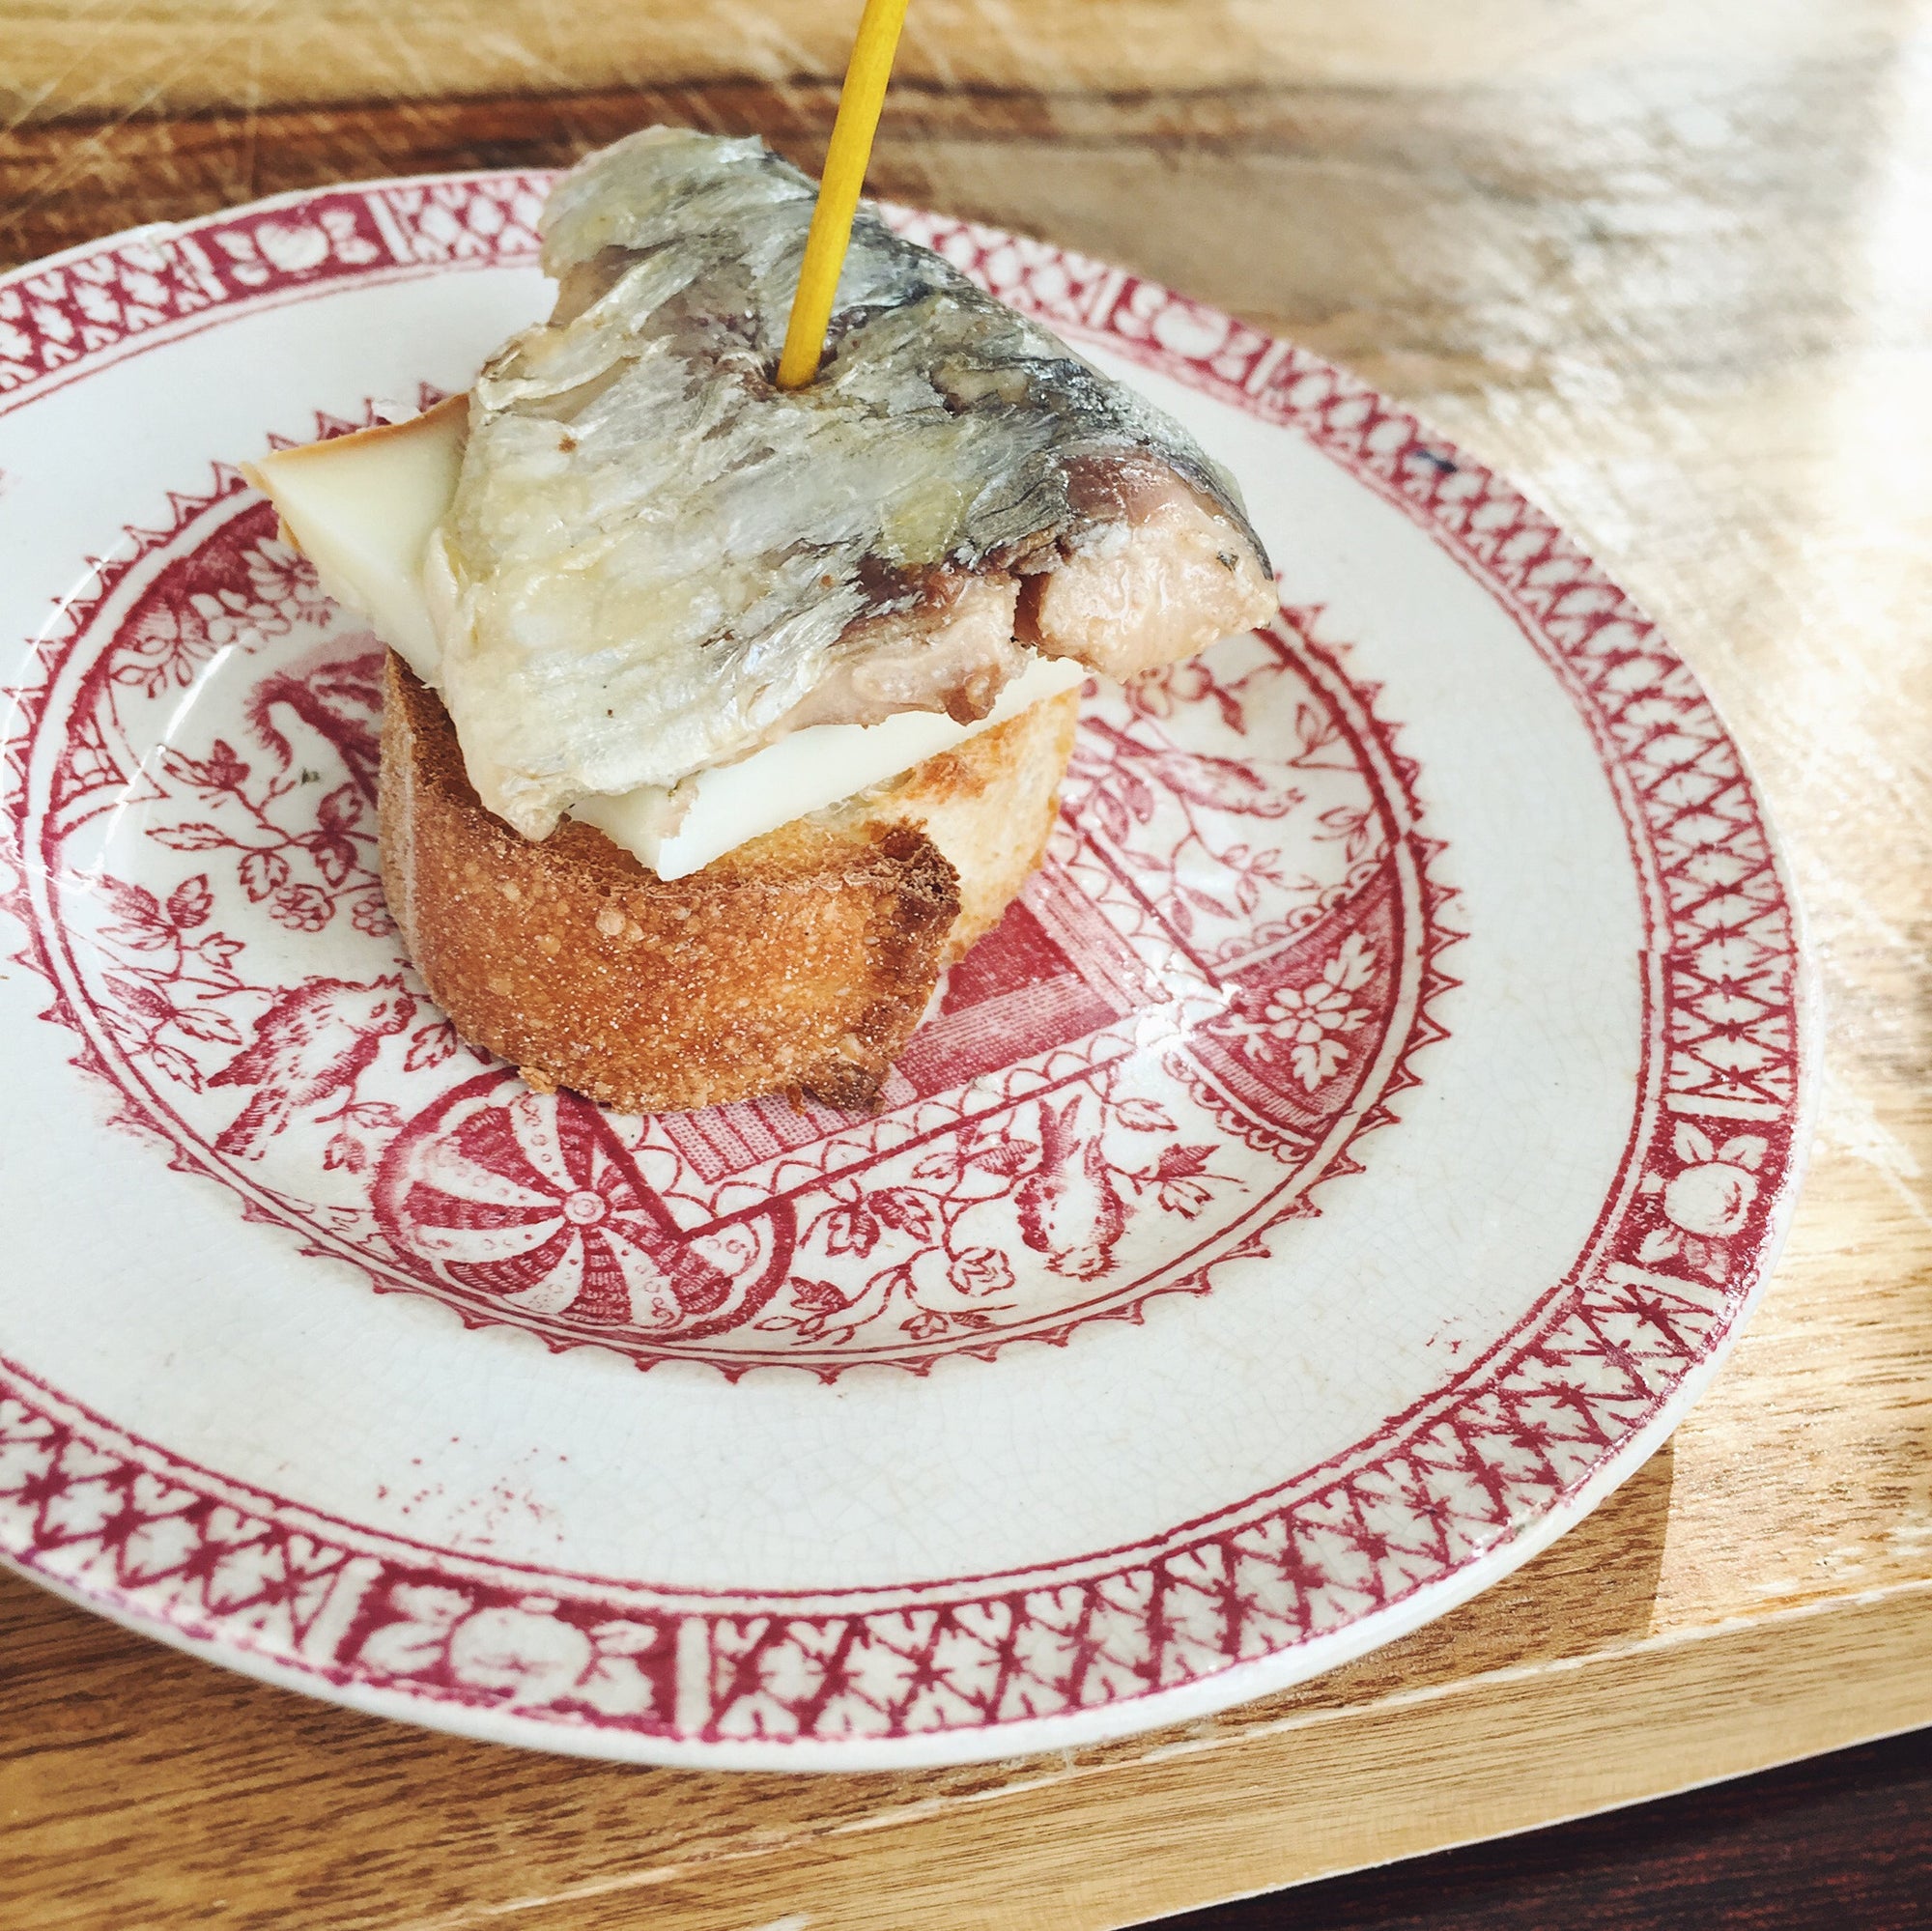 Sardine in Olive Oil with Basque Cheese Pintxo - Donostia Foods